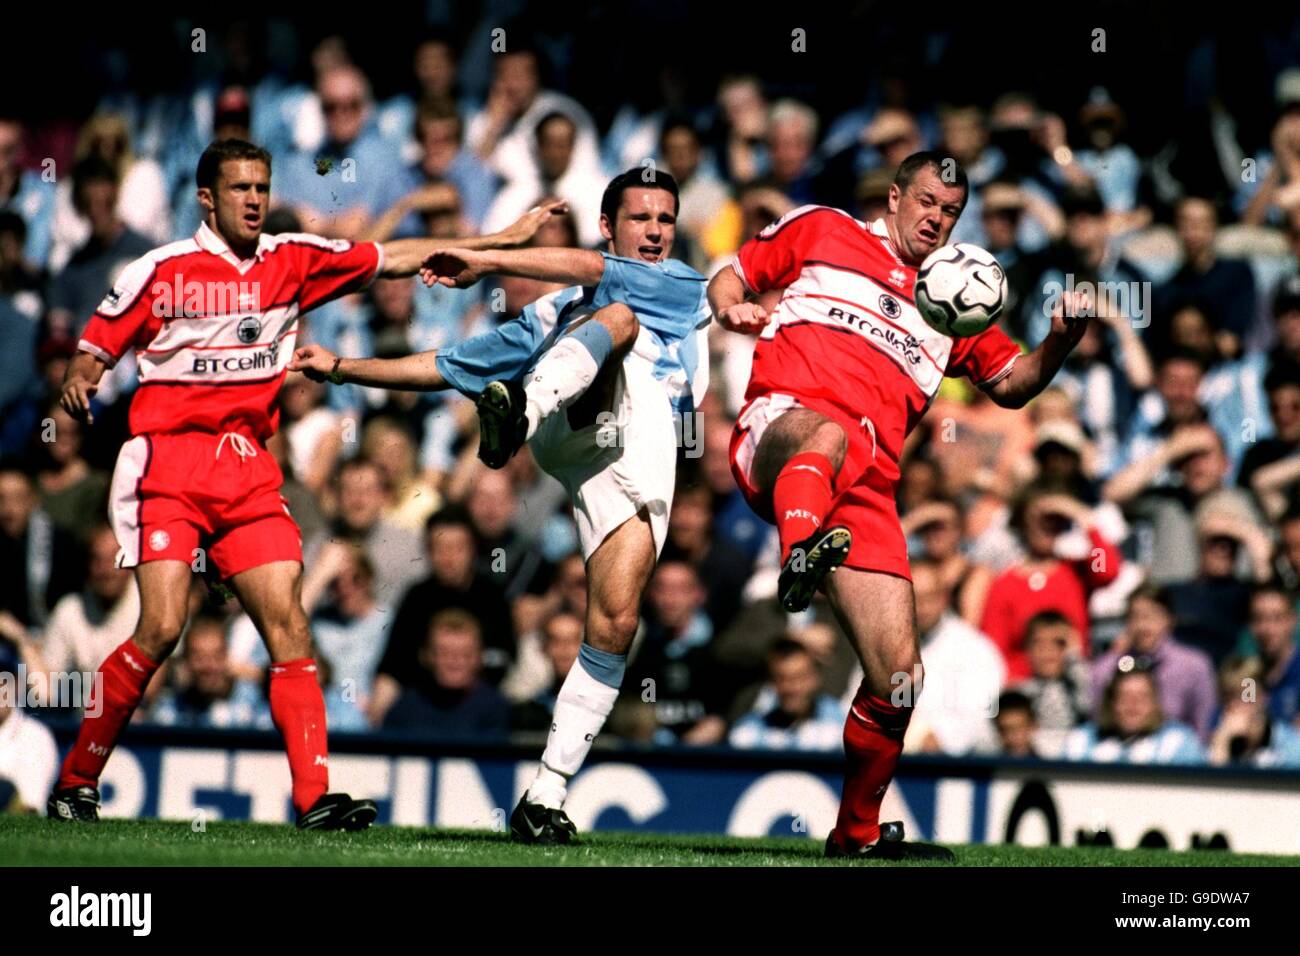 Middlesbrough's Steve Vickers (l) looks on as teammate Gary Pallister (r) challenges Coventry City's Cedric Roussel (c) Stock Photo